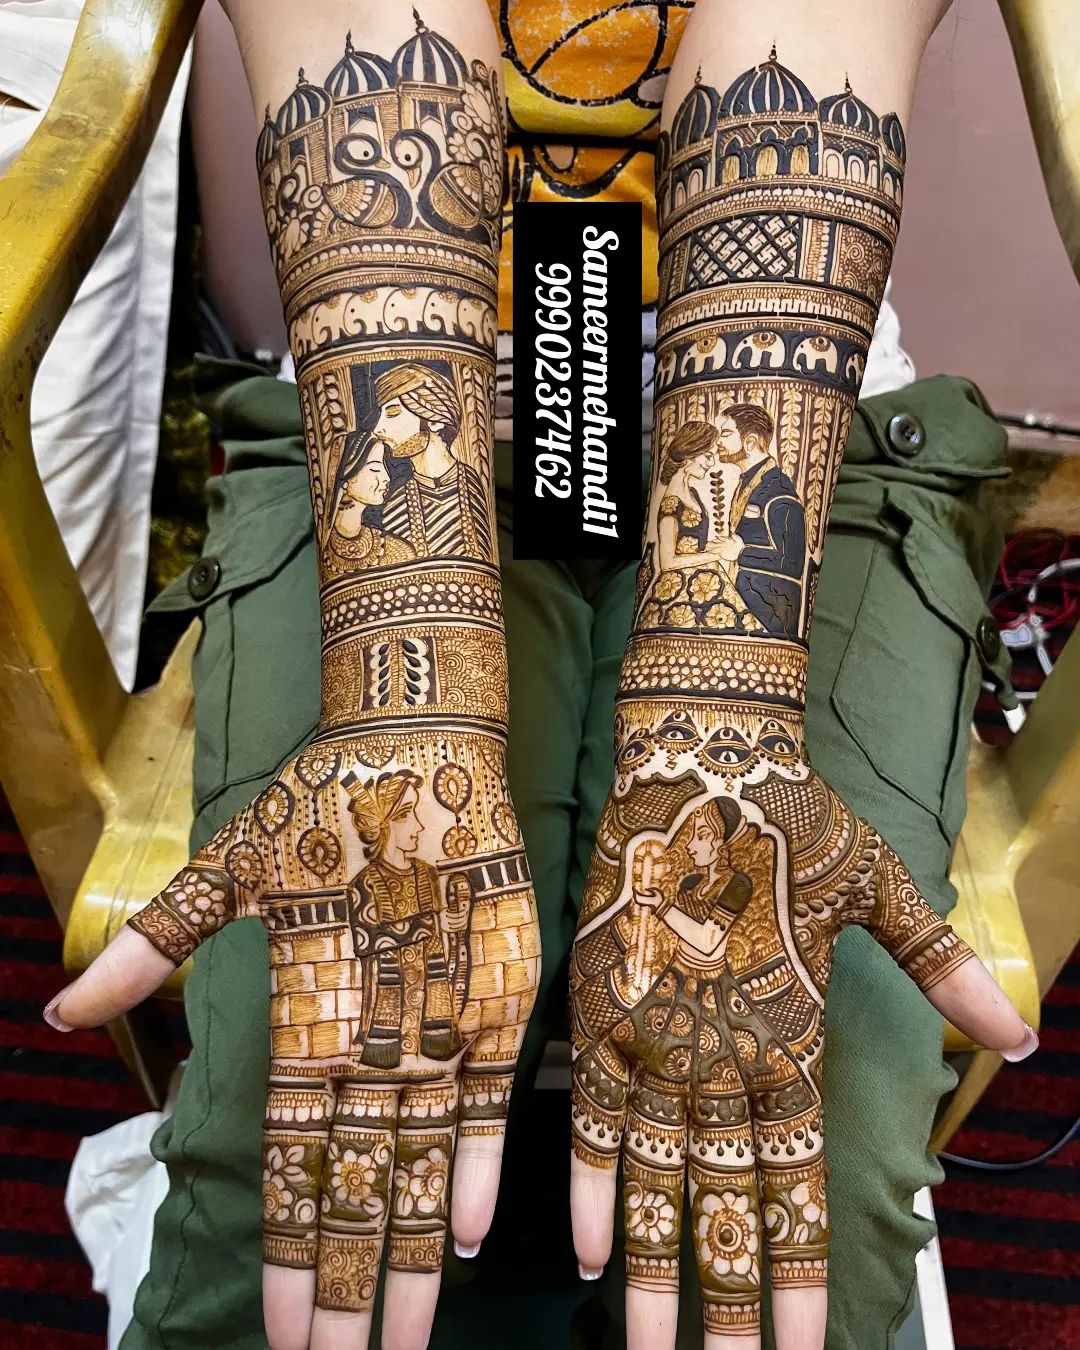 A Guide To Types Of Mehndi, Are You Ready For A Mehndi-Full Ride? | by  Natasha Silva | Medium